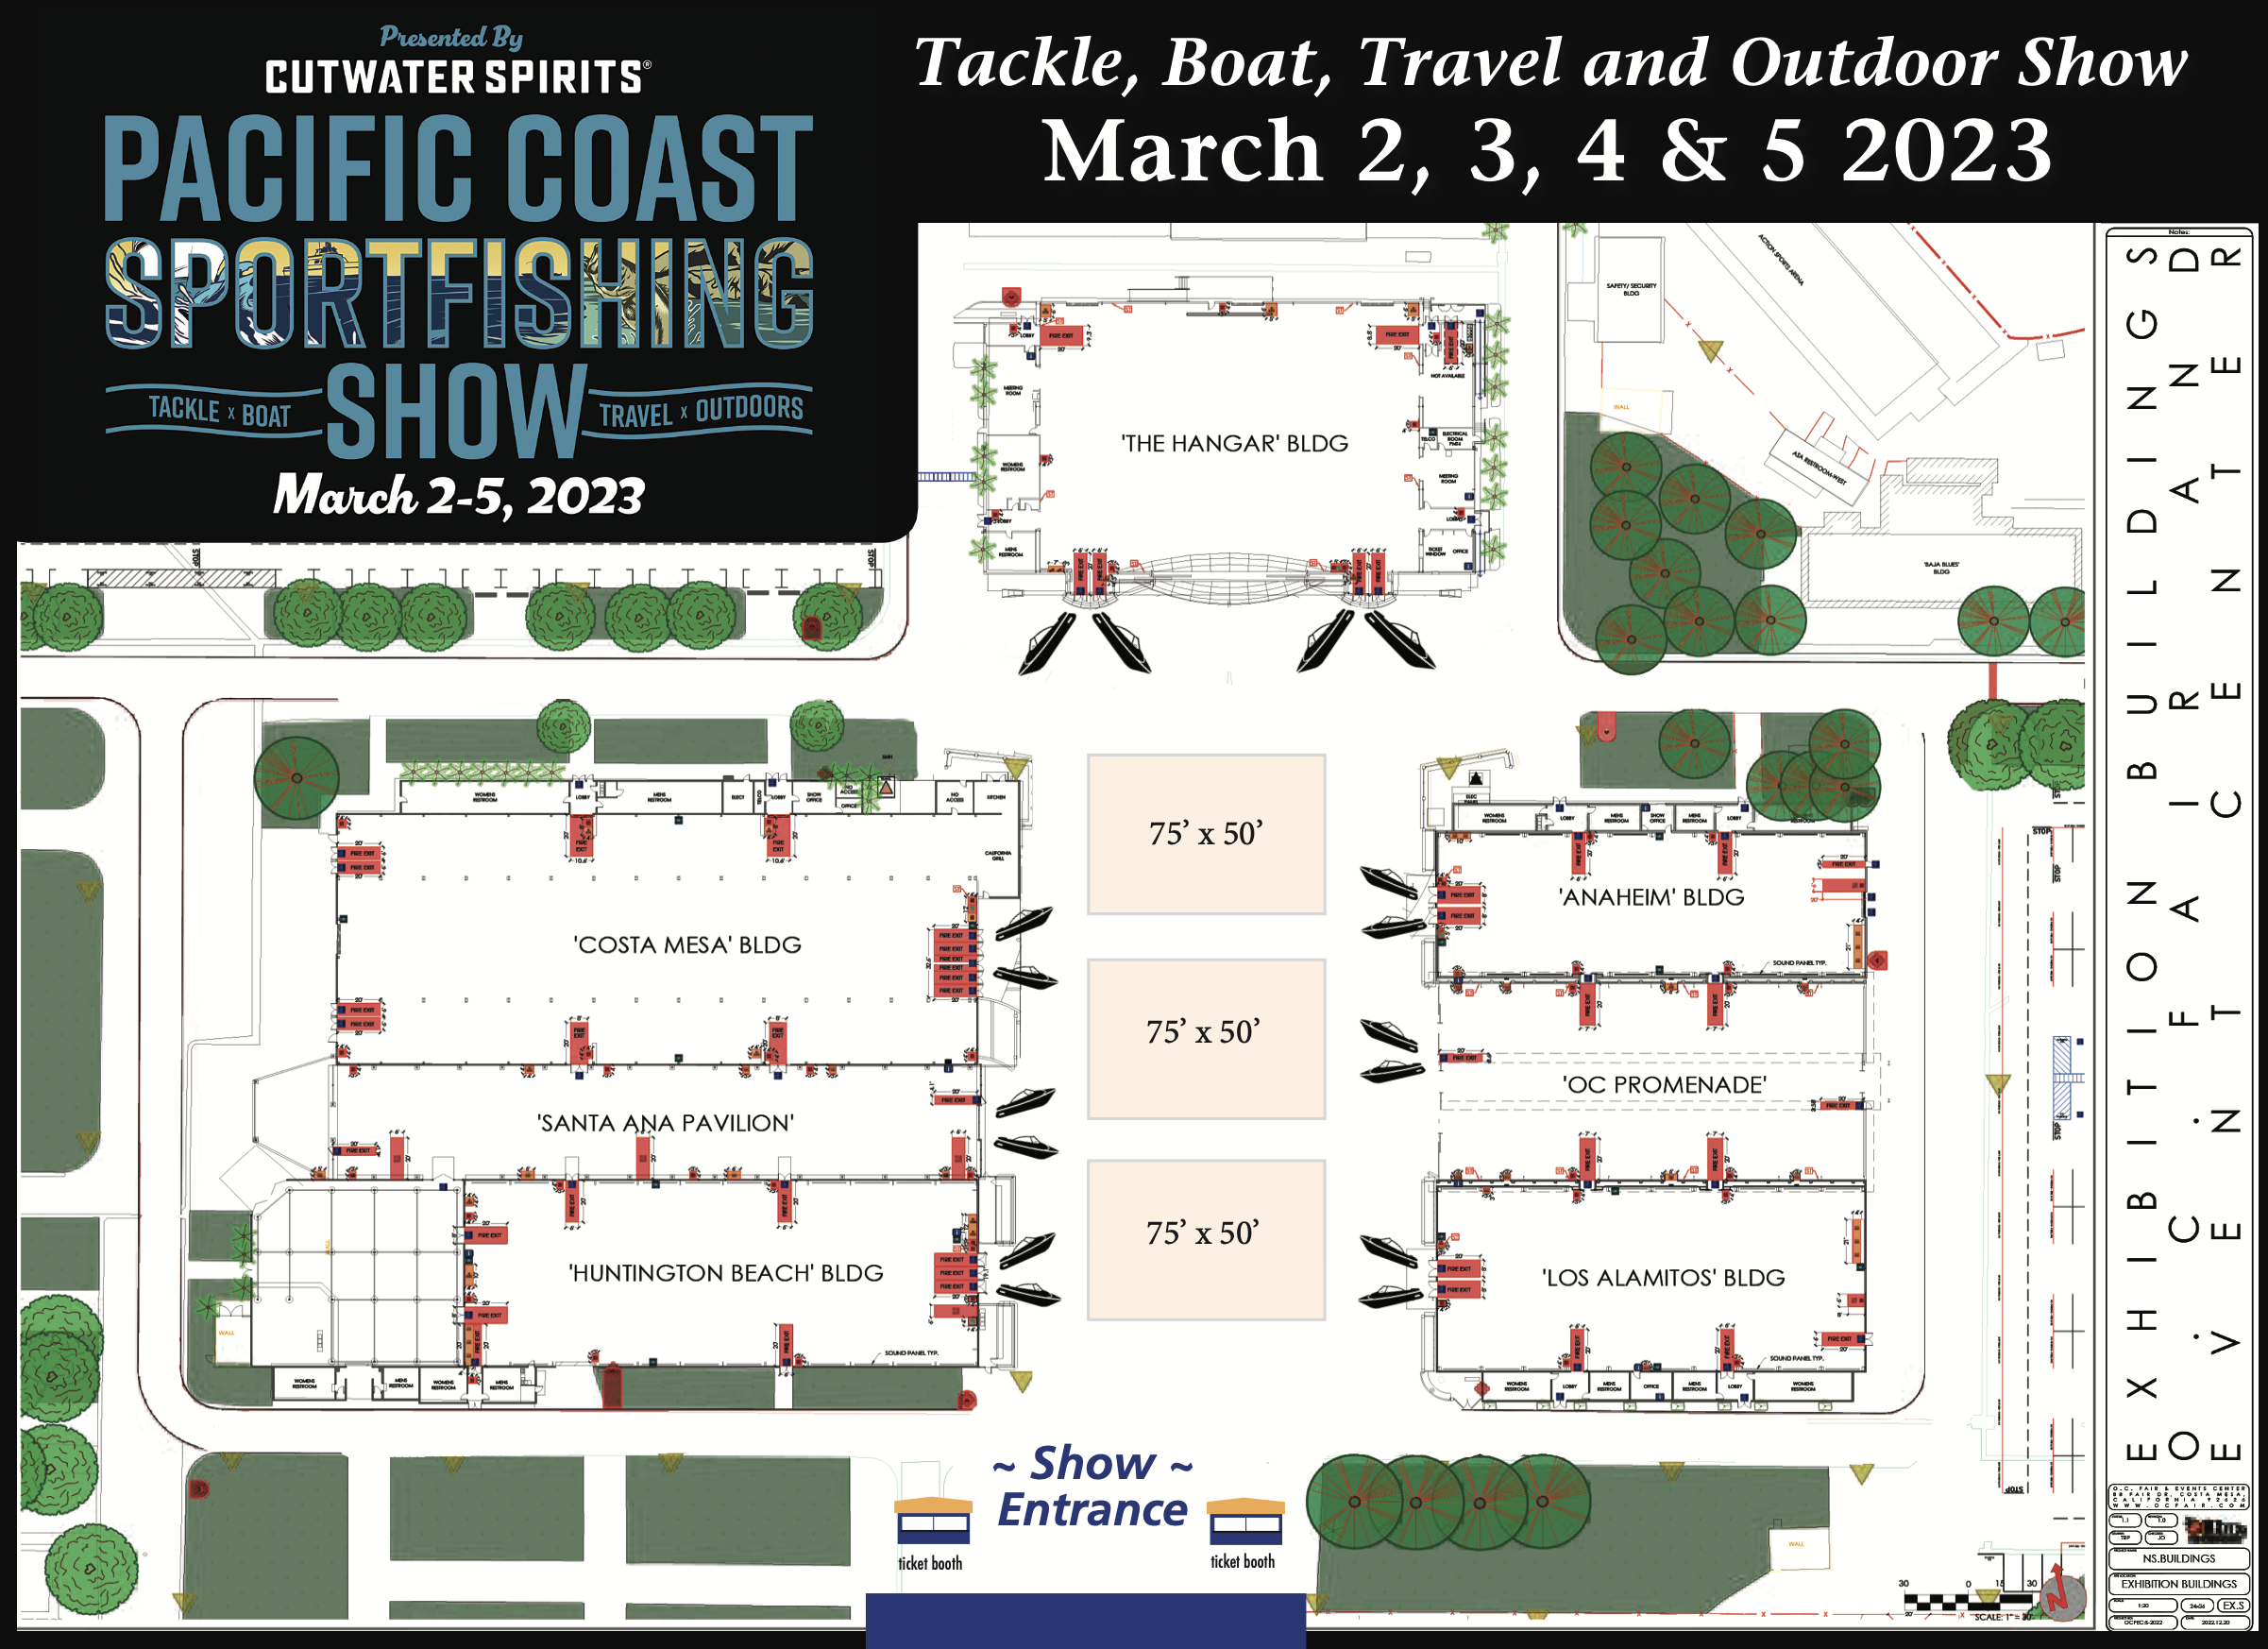 Pacific Coast Sportfishing Tackle, Boat, Travel and Outdoors Show Festival Layout